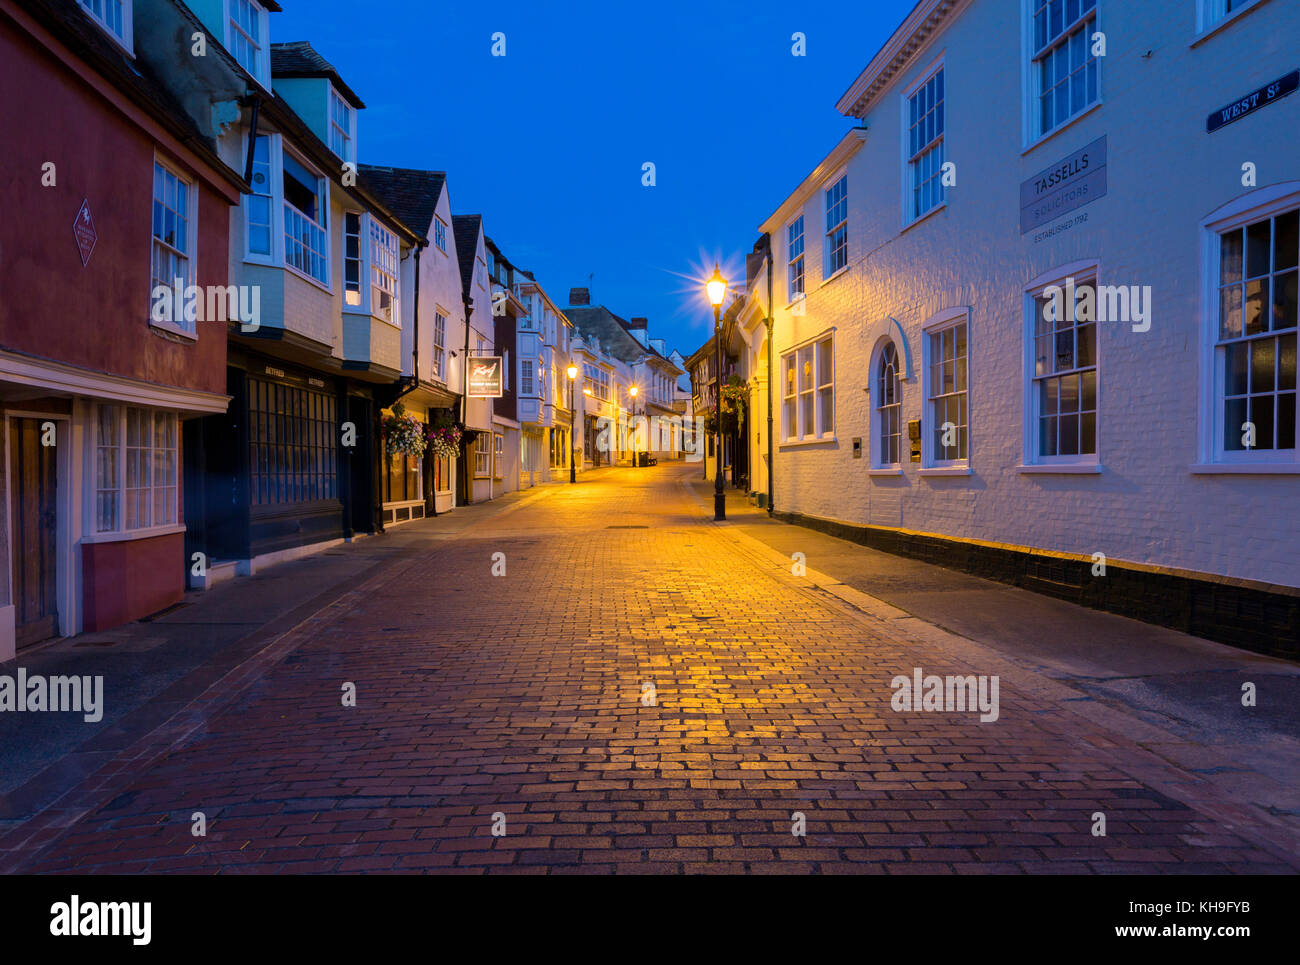 The Medieval buildings of West Street during the Blue Hour after sunset, in the market town of Faversham, Kent, UK. Stock Photo